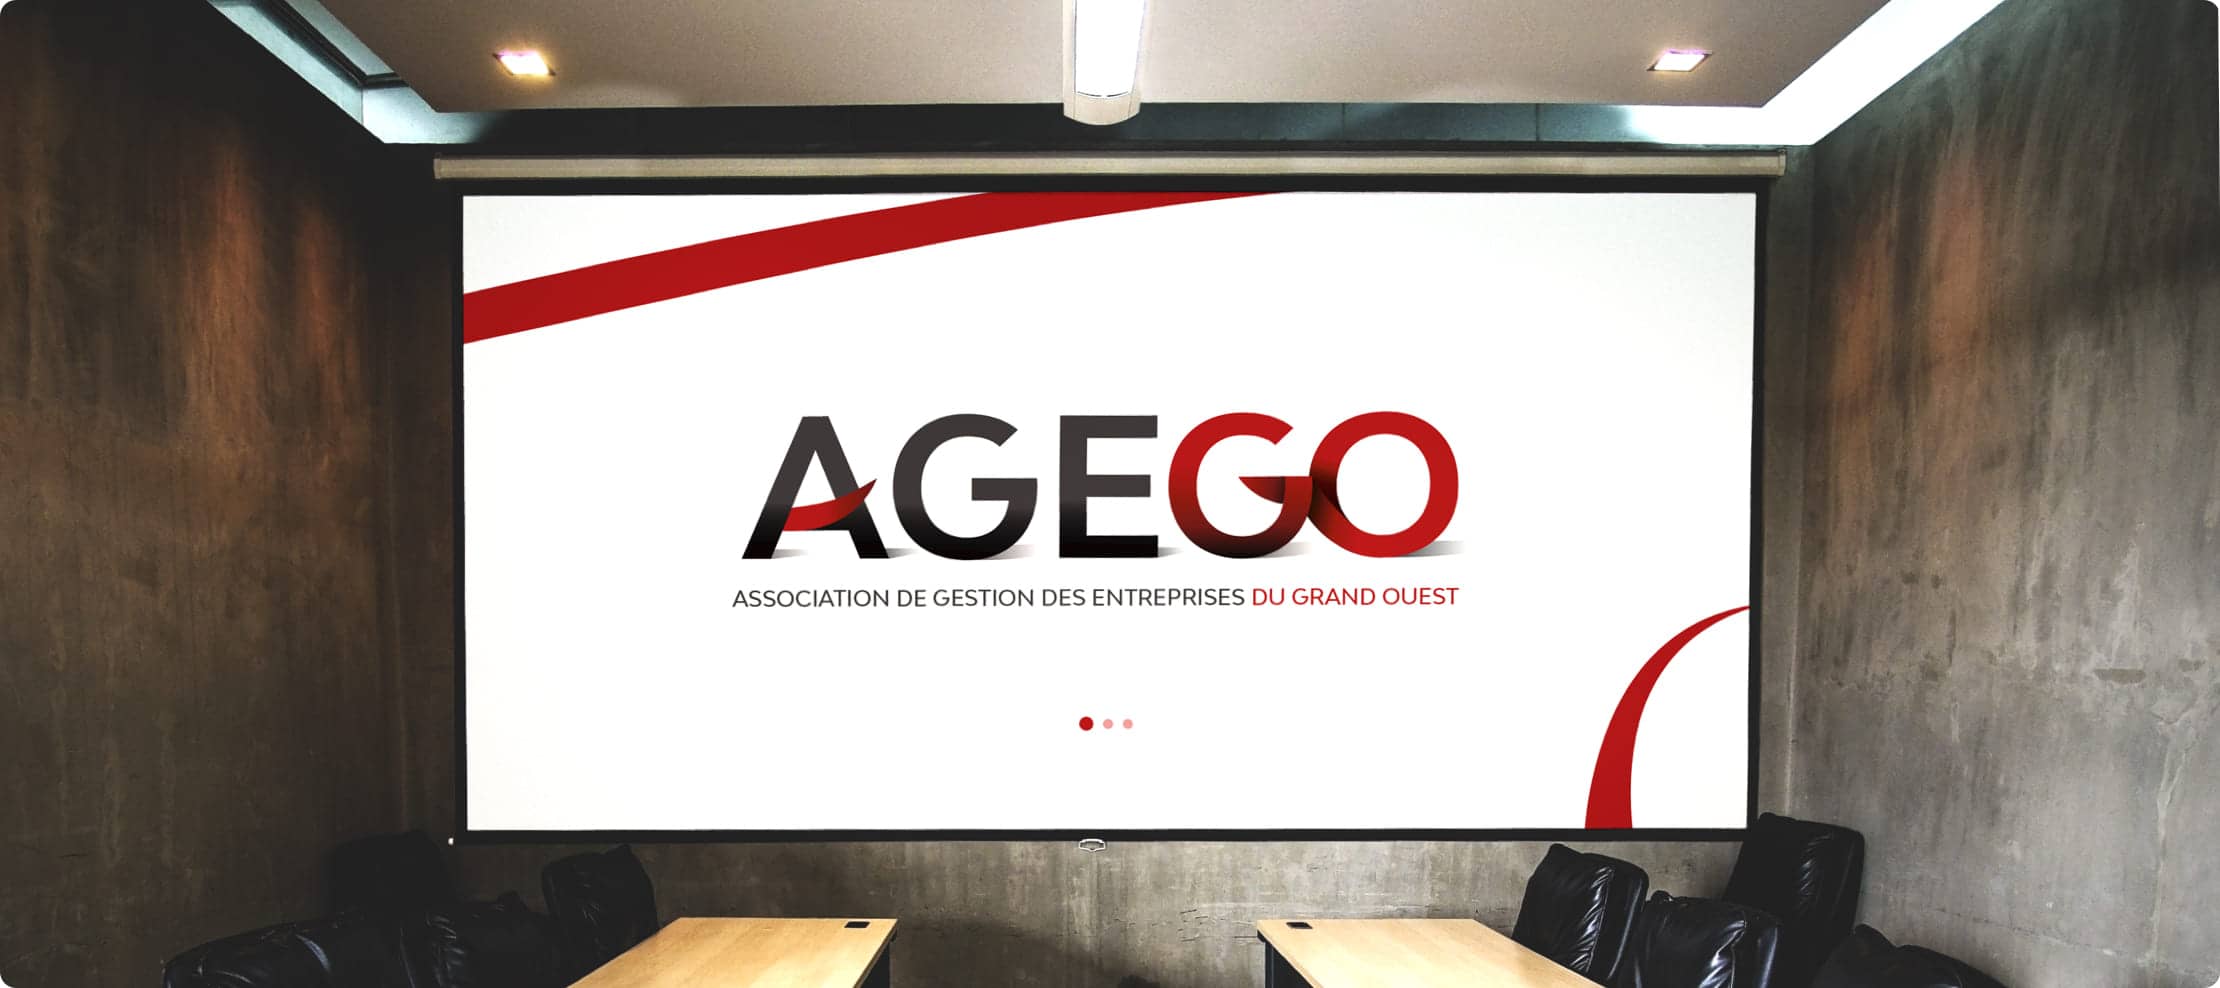 Agego création logotype, graphitéine limoges